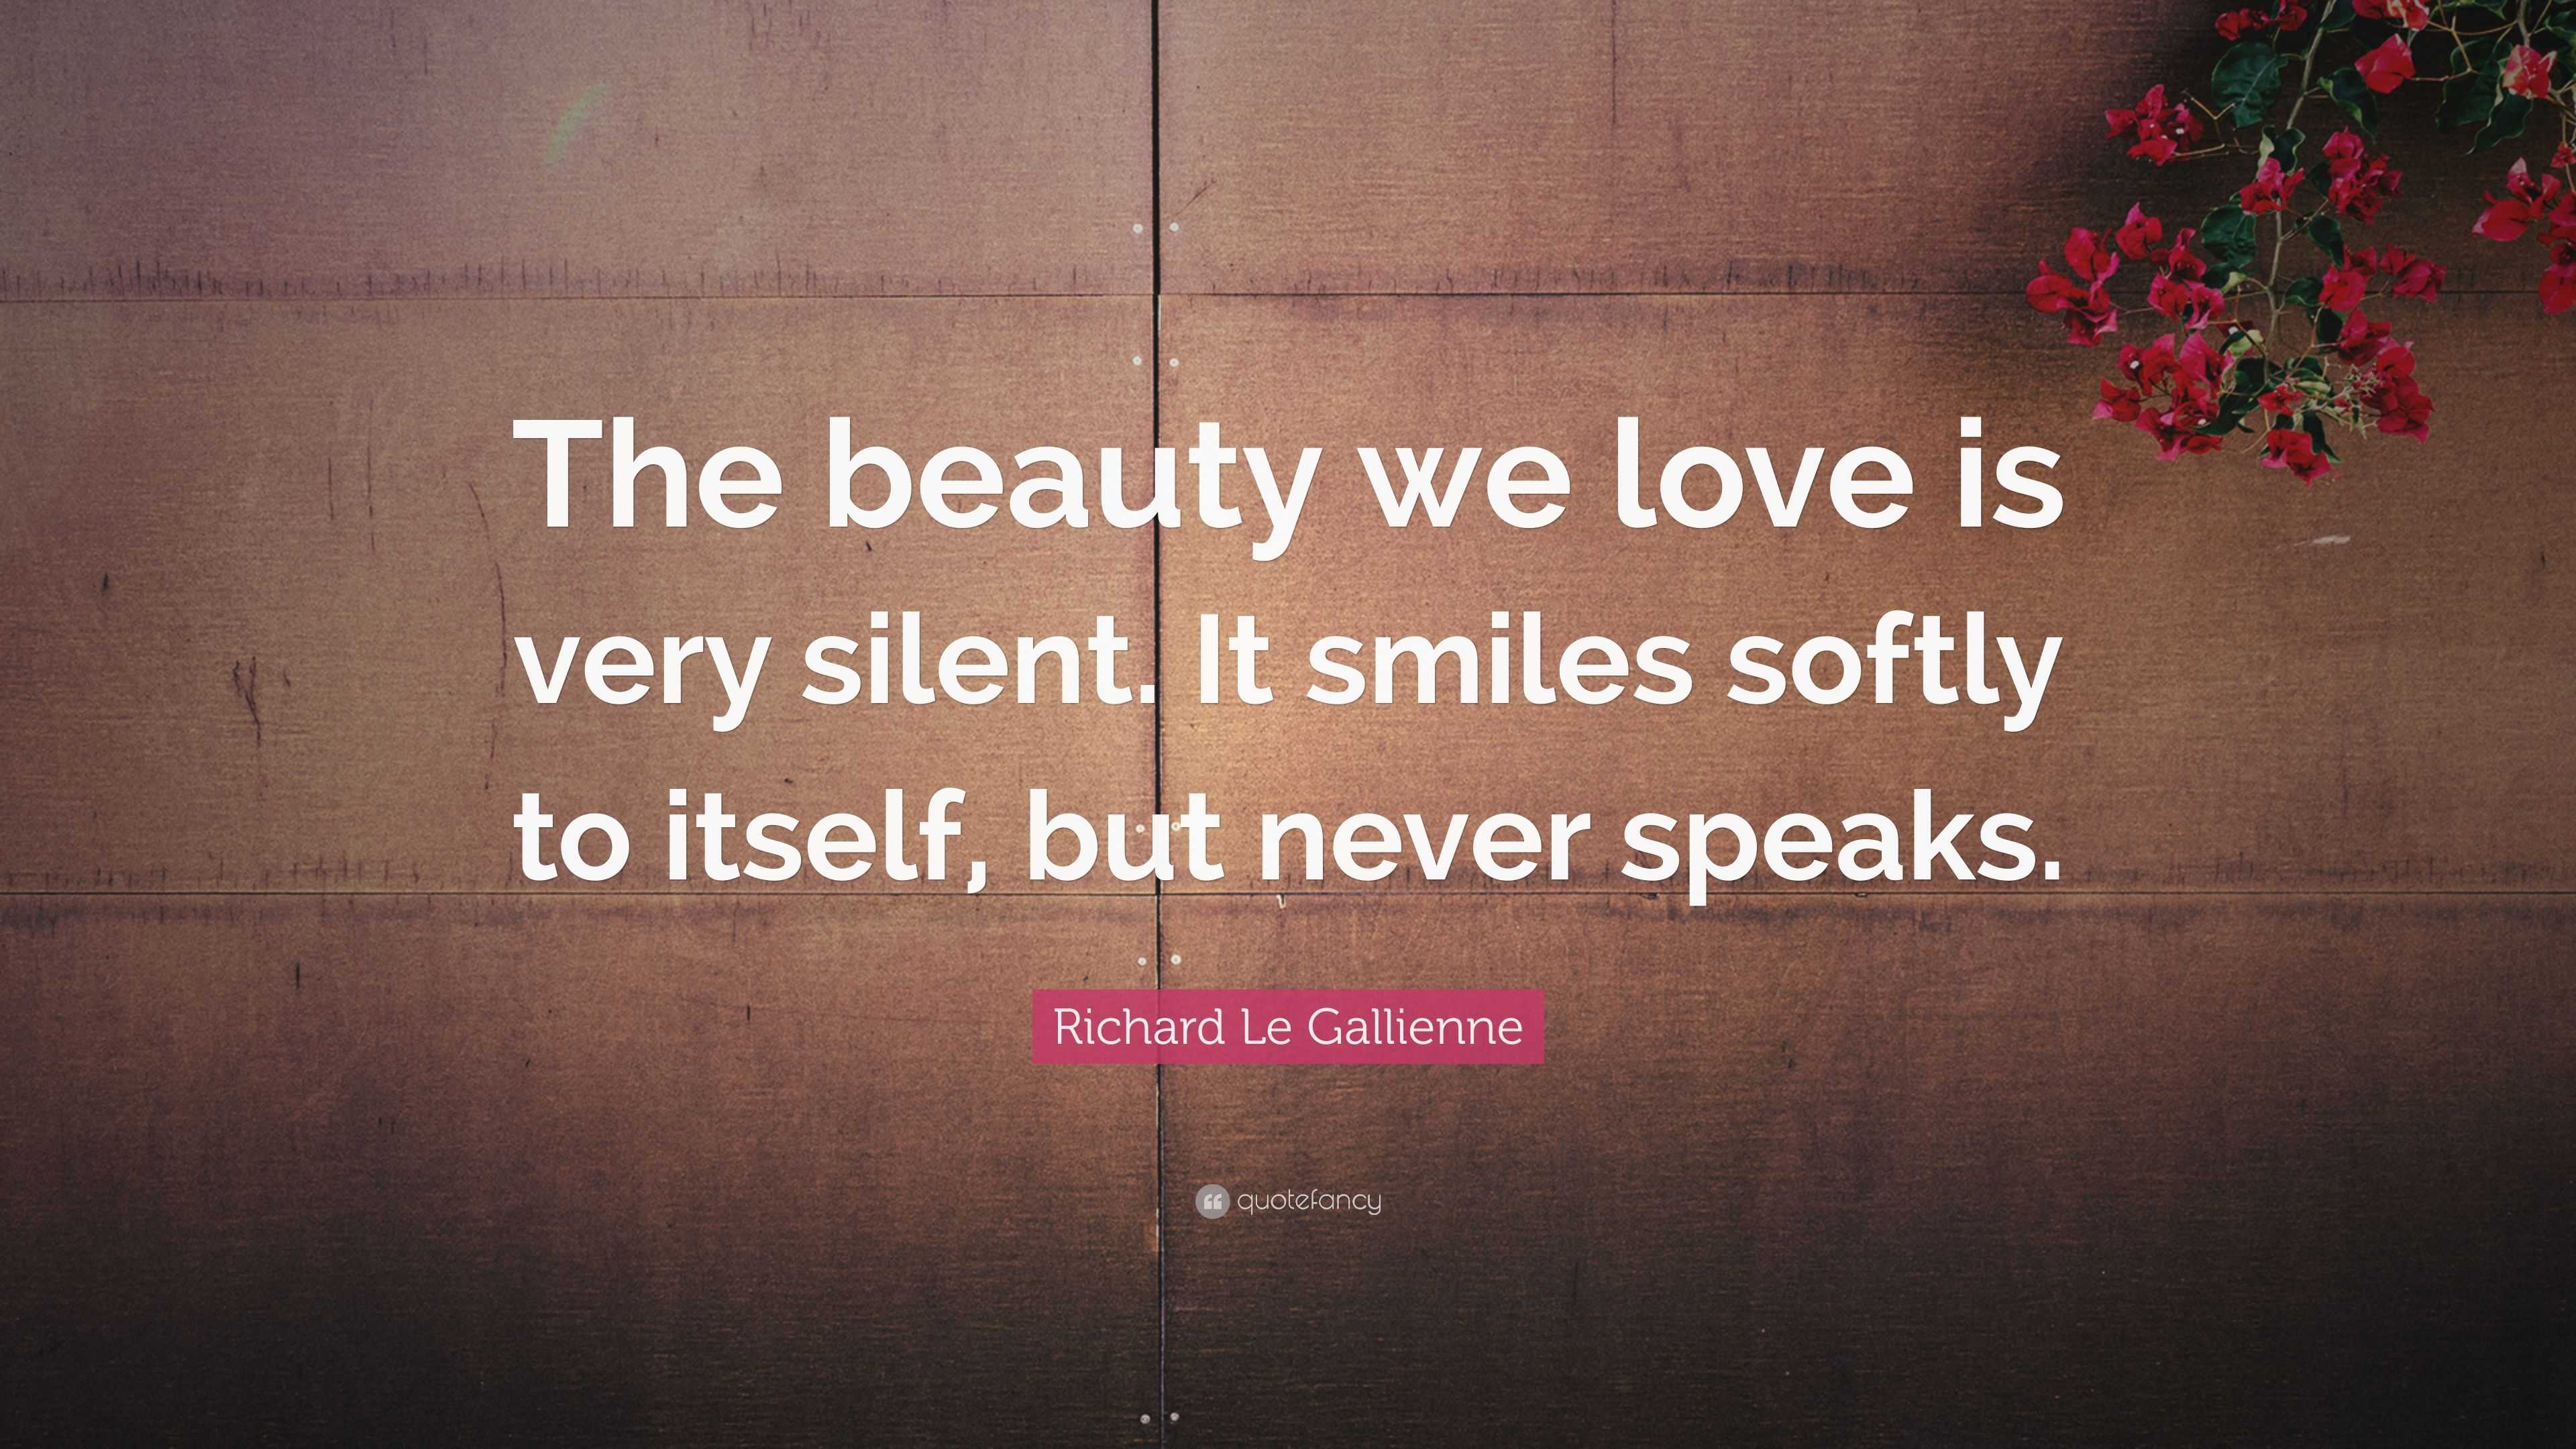 Richard Le Gallienne Quote “The beauty we love is very silent It smiles